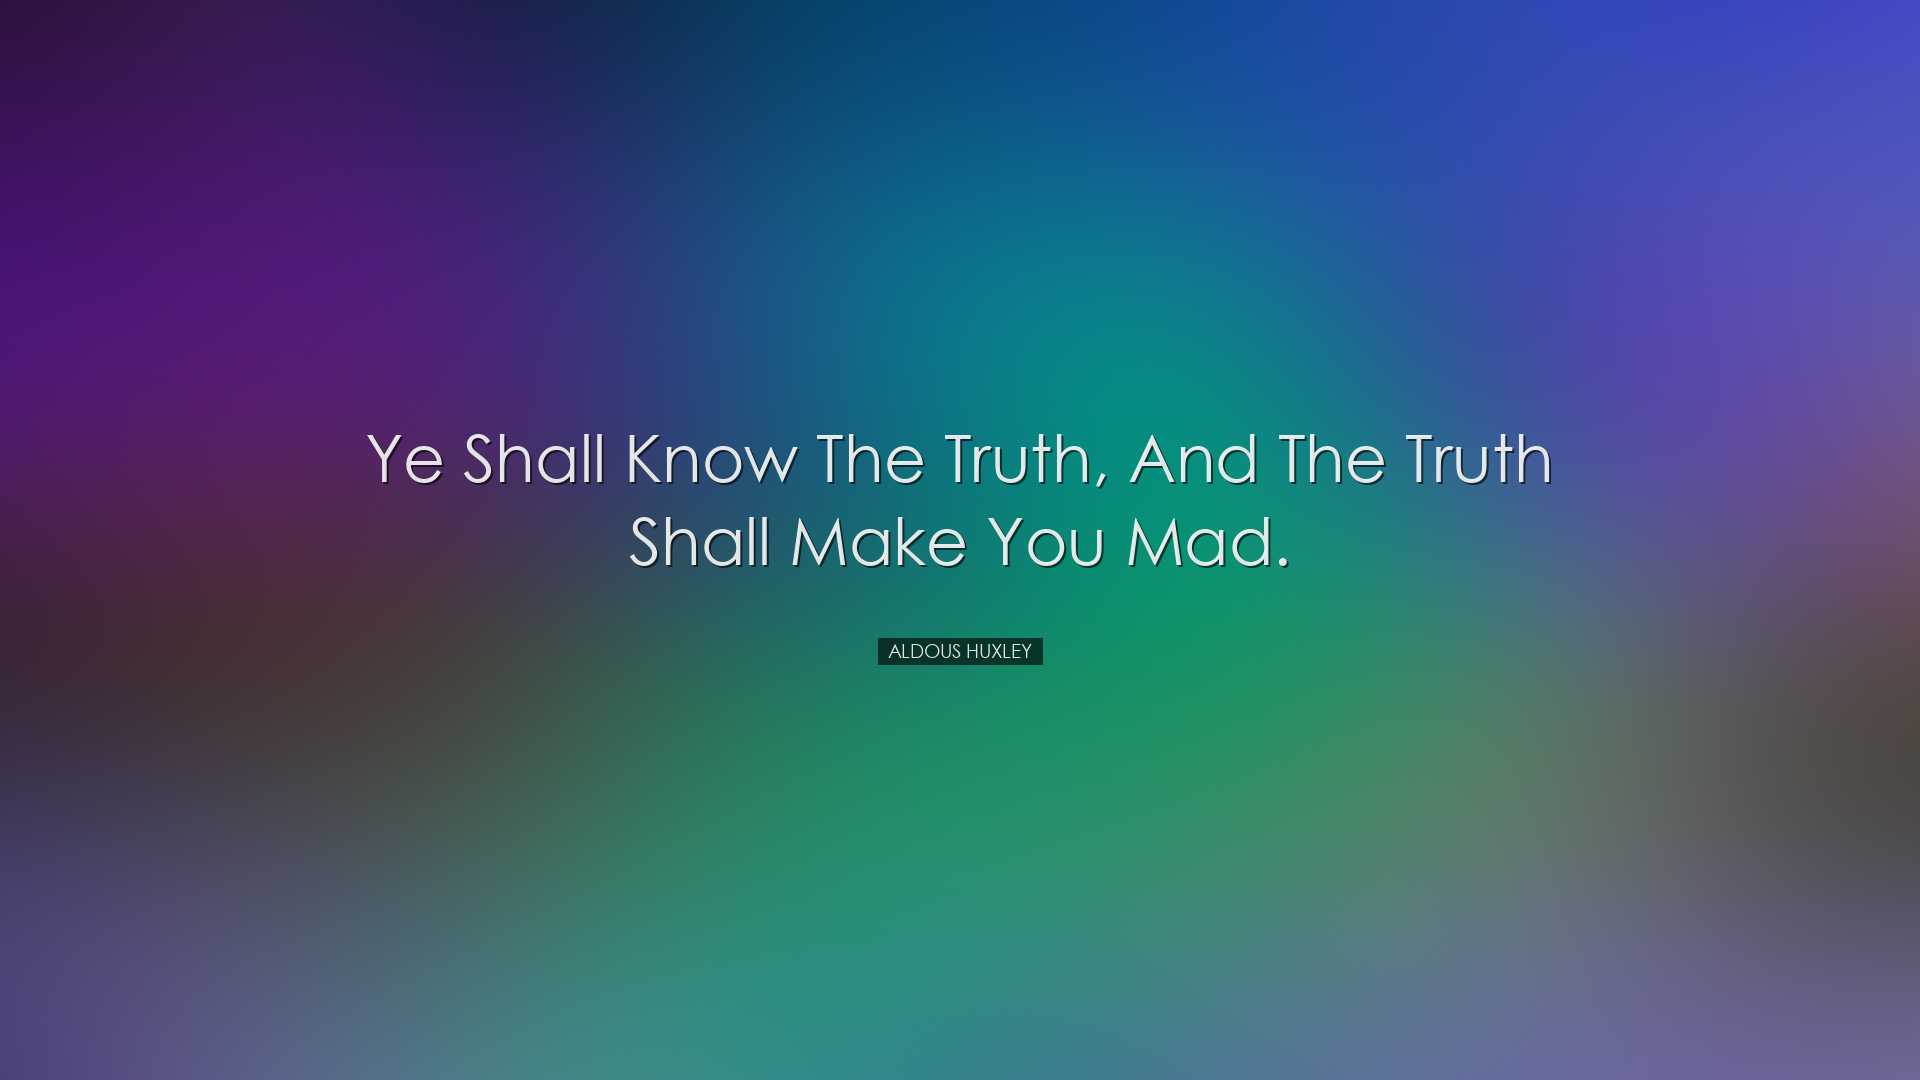 Ye shall know the truth, and the truth shall make you mad. - Aldou